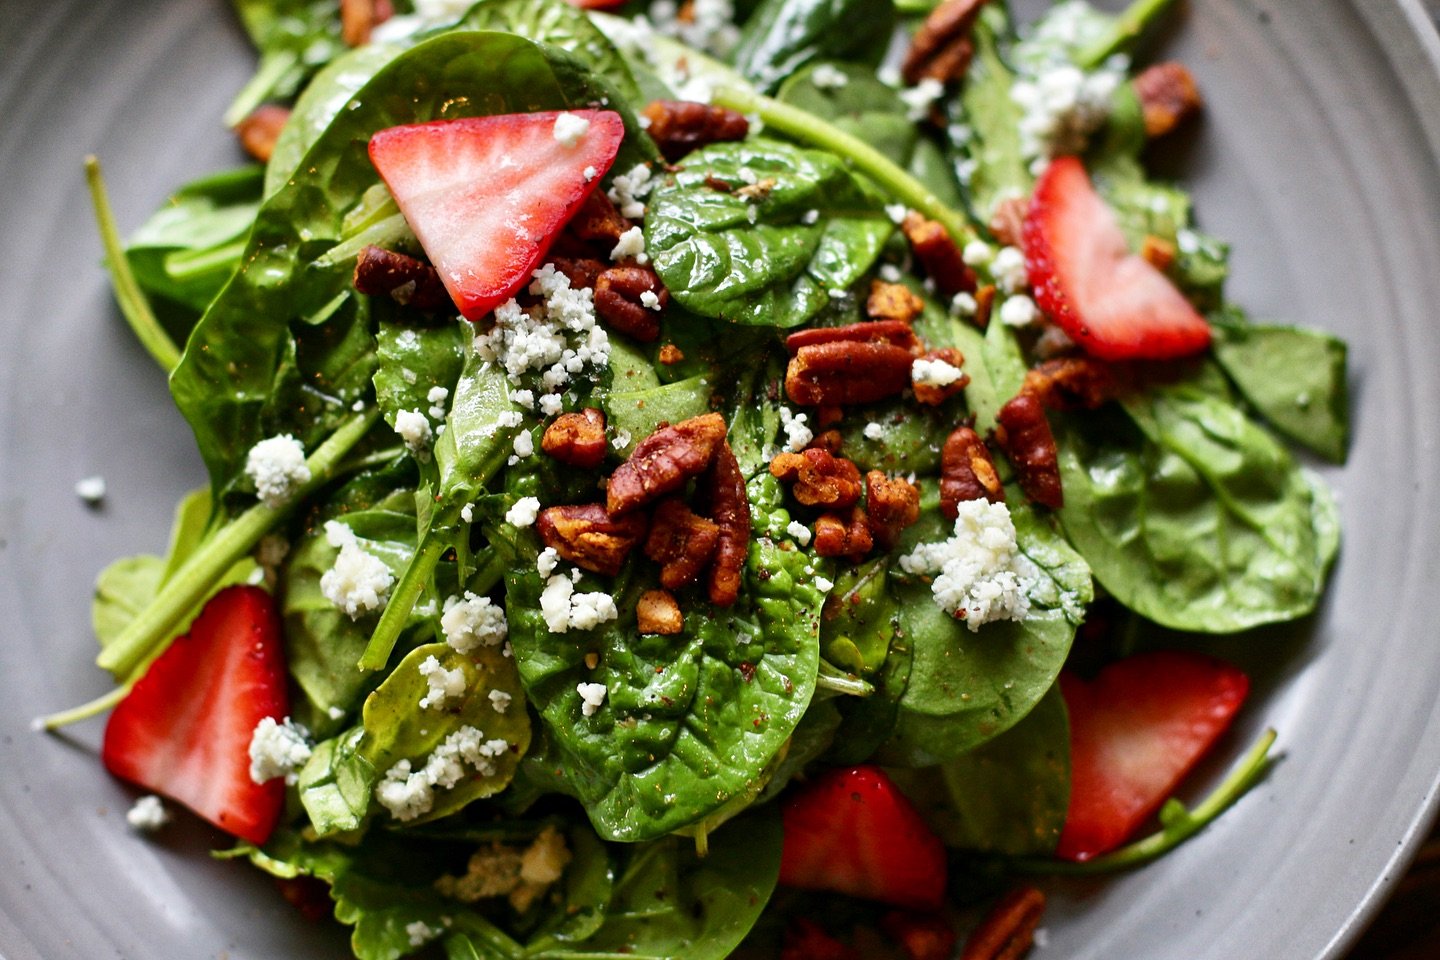 Going green this spring 🥬🍓

Spinach and arugula, tossed in strawberry vinaigrette, with spiced pecans, asher blue cheese crumbles, and local strawberries from @woodlandgardensathens